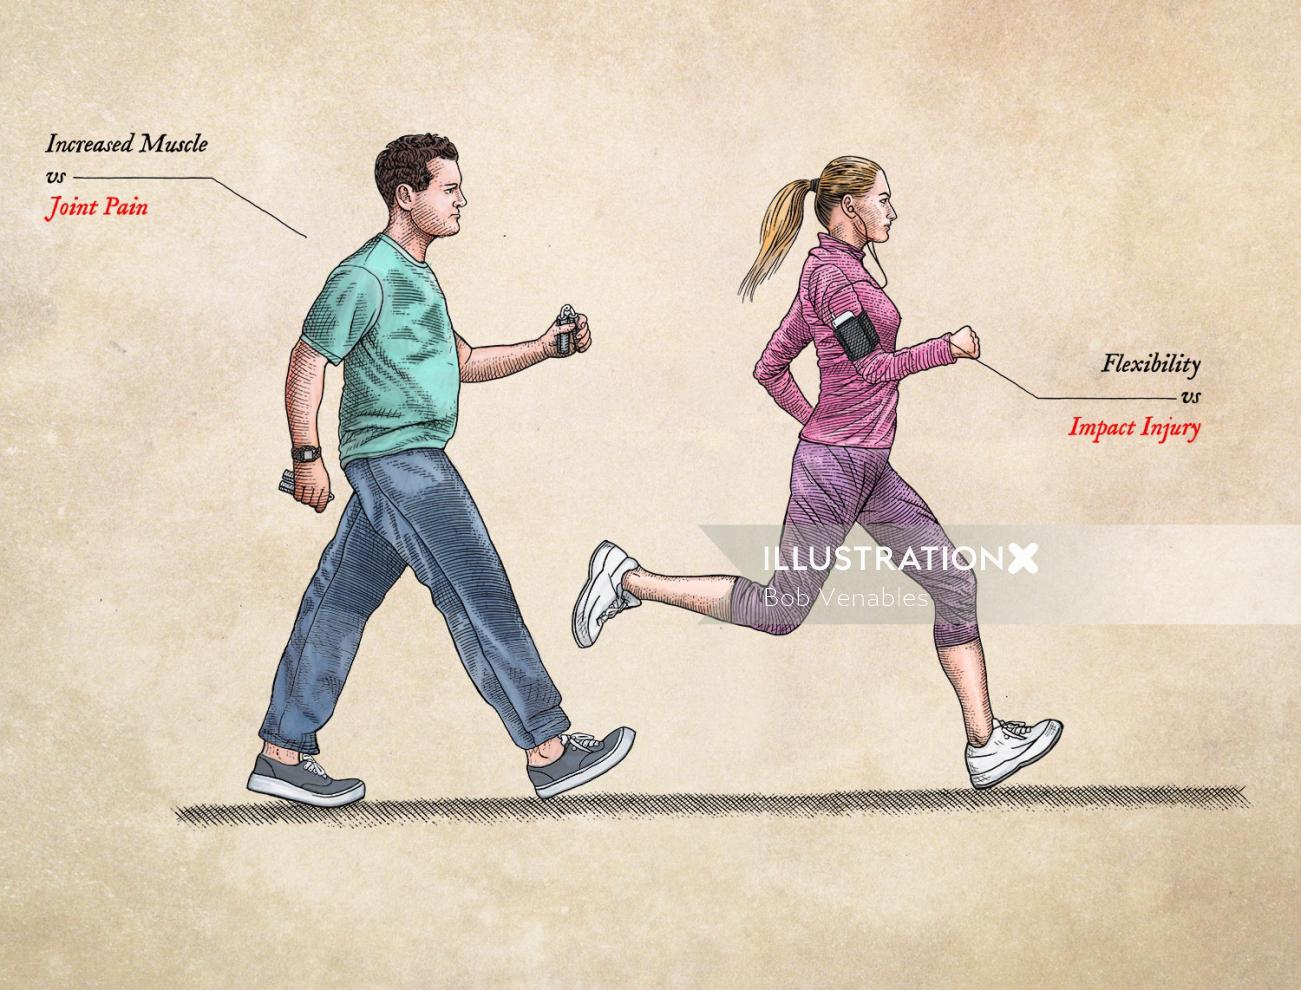 Infographic illustration about Joint Pain